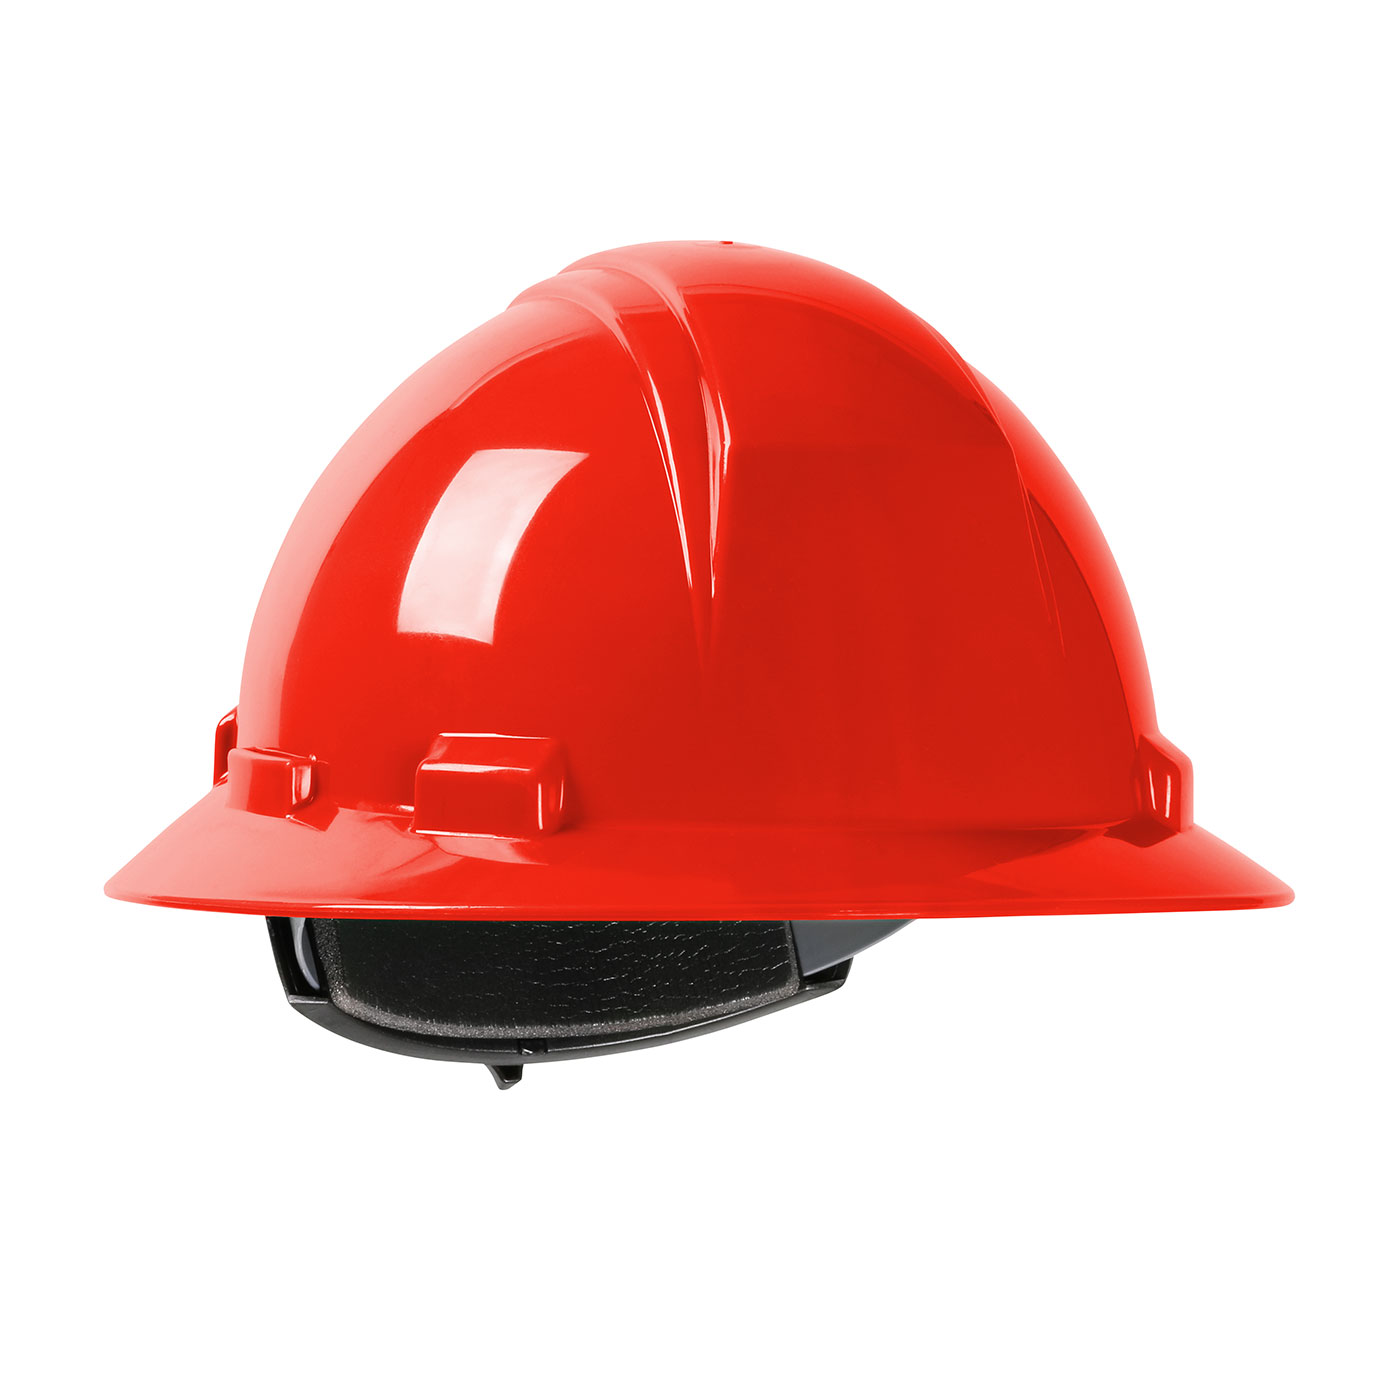 280-HP261R PIP® Dynamic Kilimanjaro™ Full Brim Hard Hat with HDPE Shell, 4-Point Textile Suspension and Wheel Ratchet Adjustment - Red